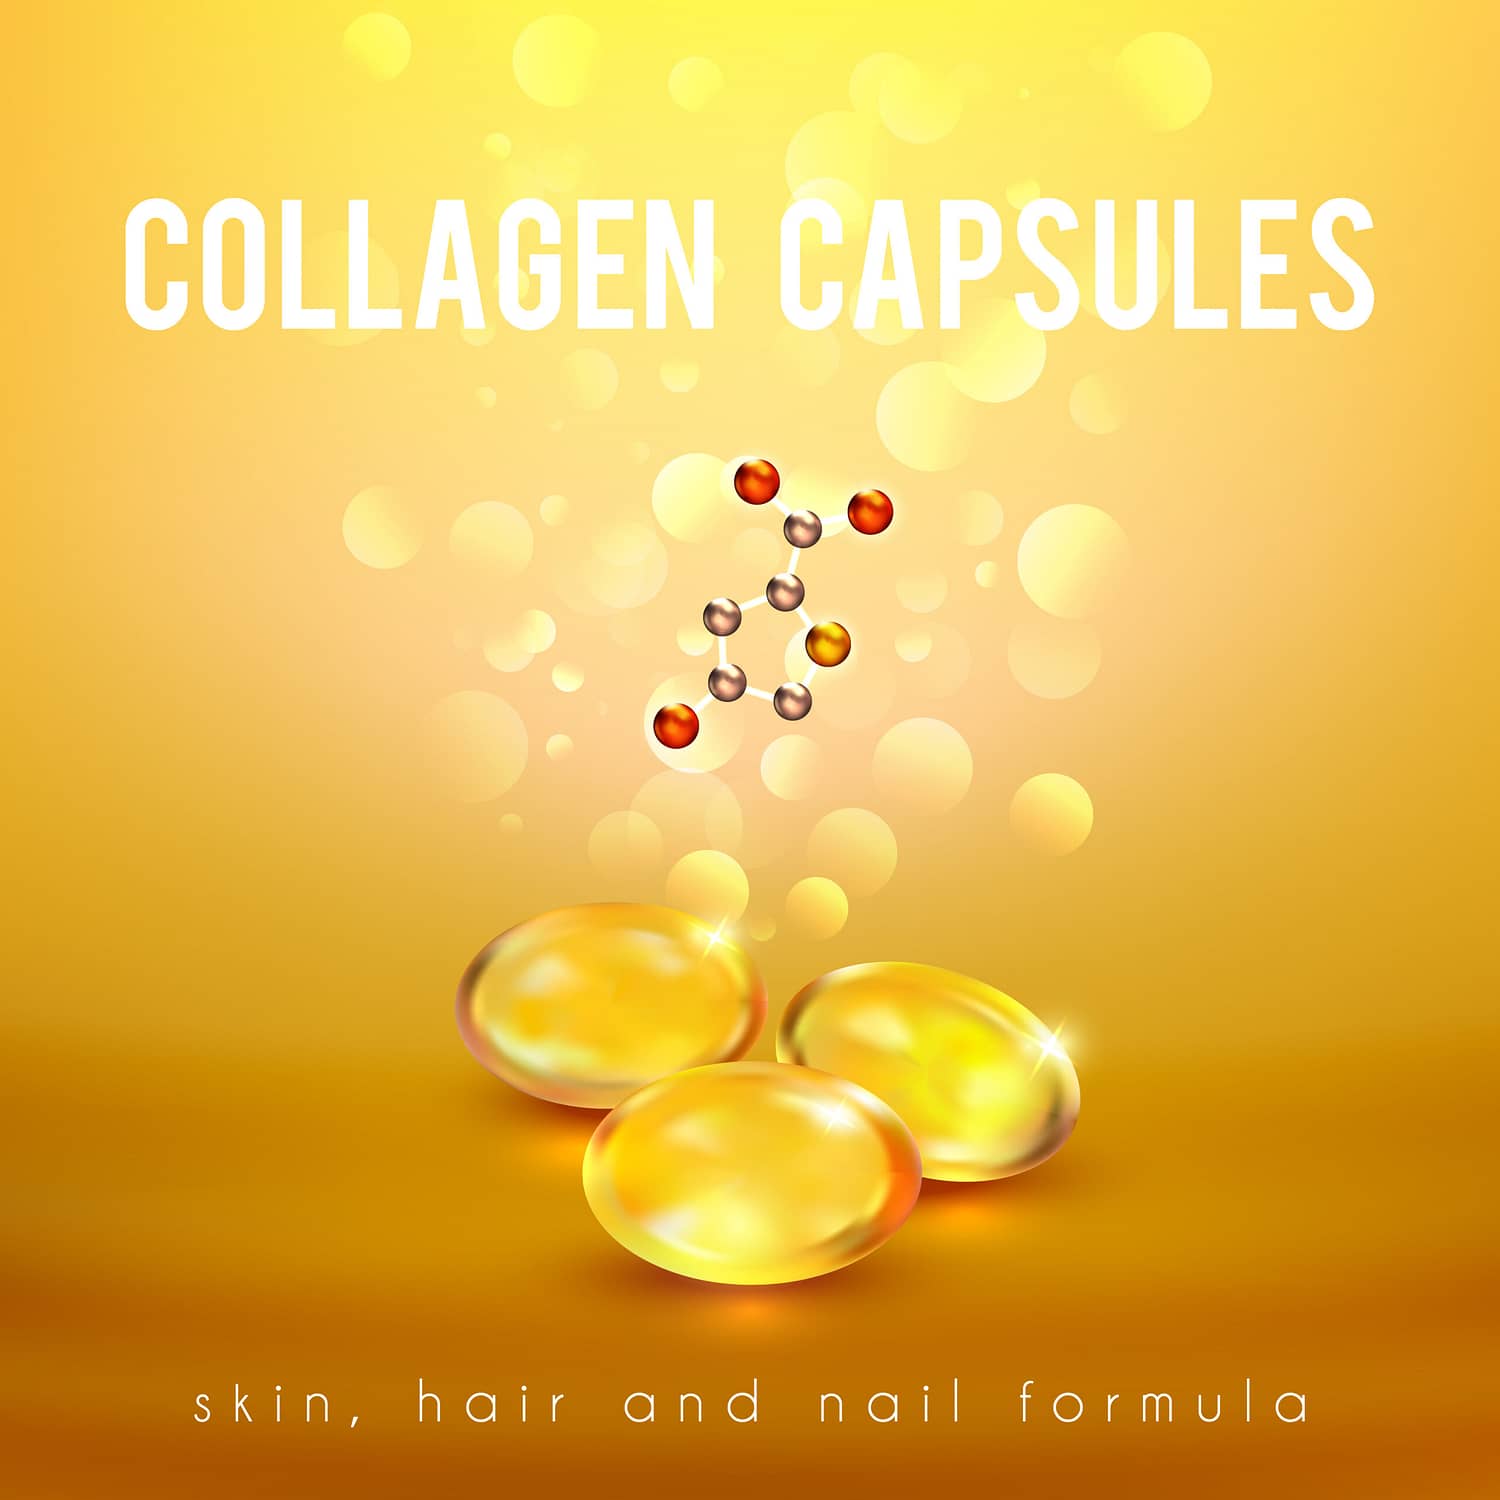 Collagen capsules for strong long hair and nails supplement formula advertisement golden background poster abstract vector illustration